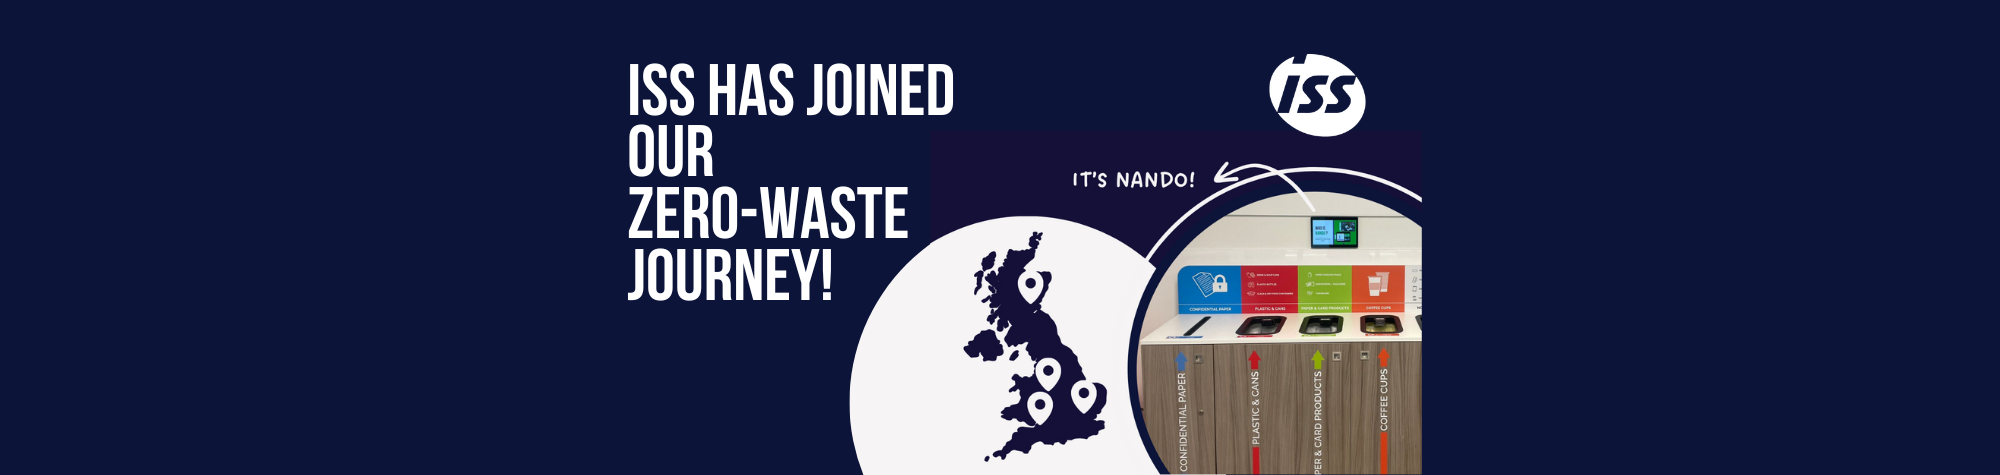 NANDO has landed in ISS Facility Services UK!